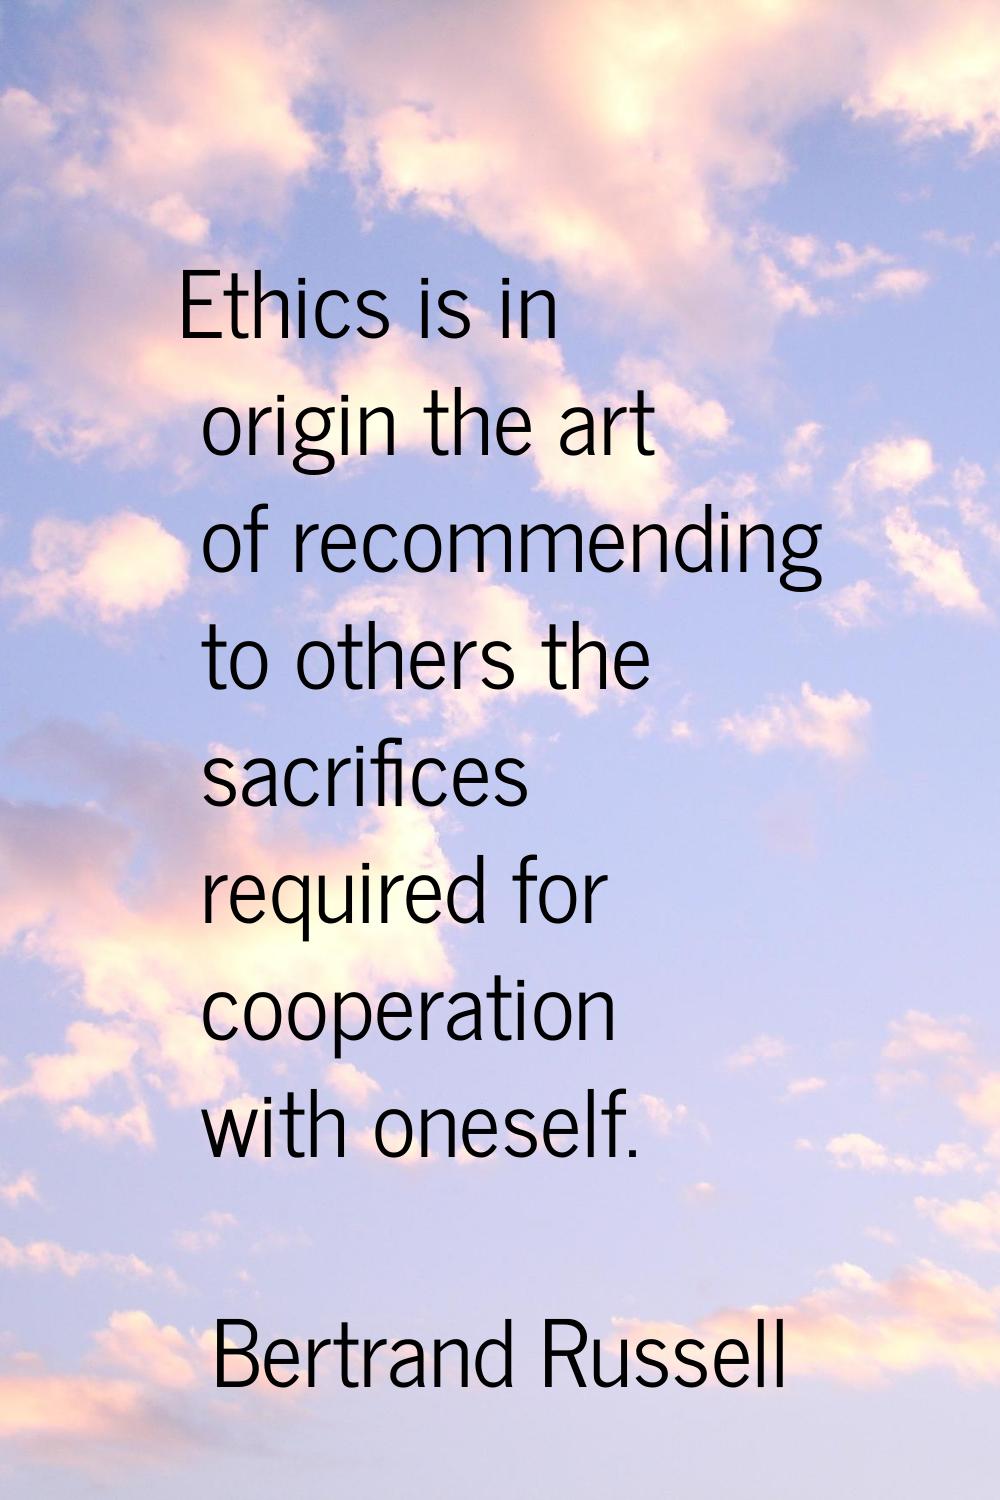 Ethics is in origin the art of recommending to others the sacrifices required for cooperation with 